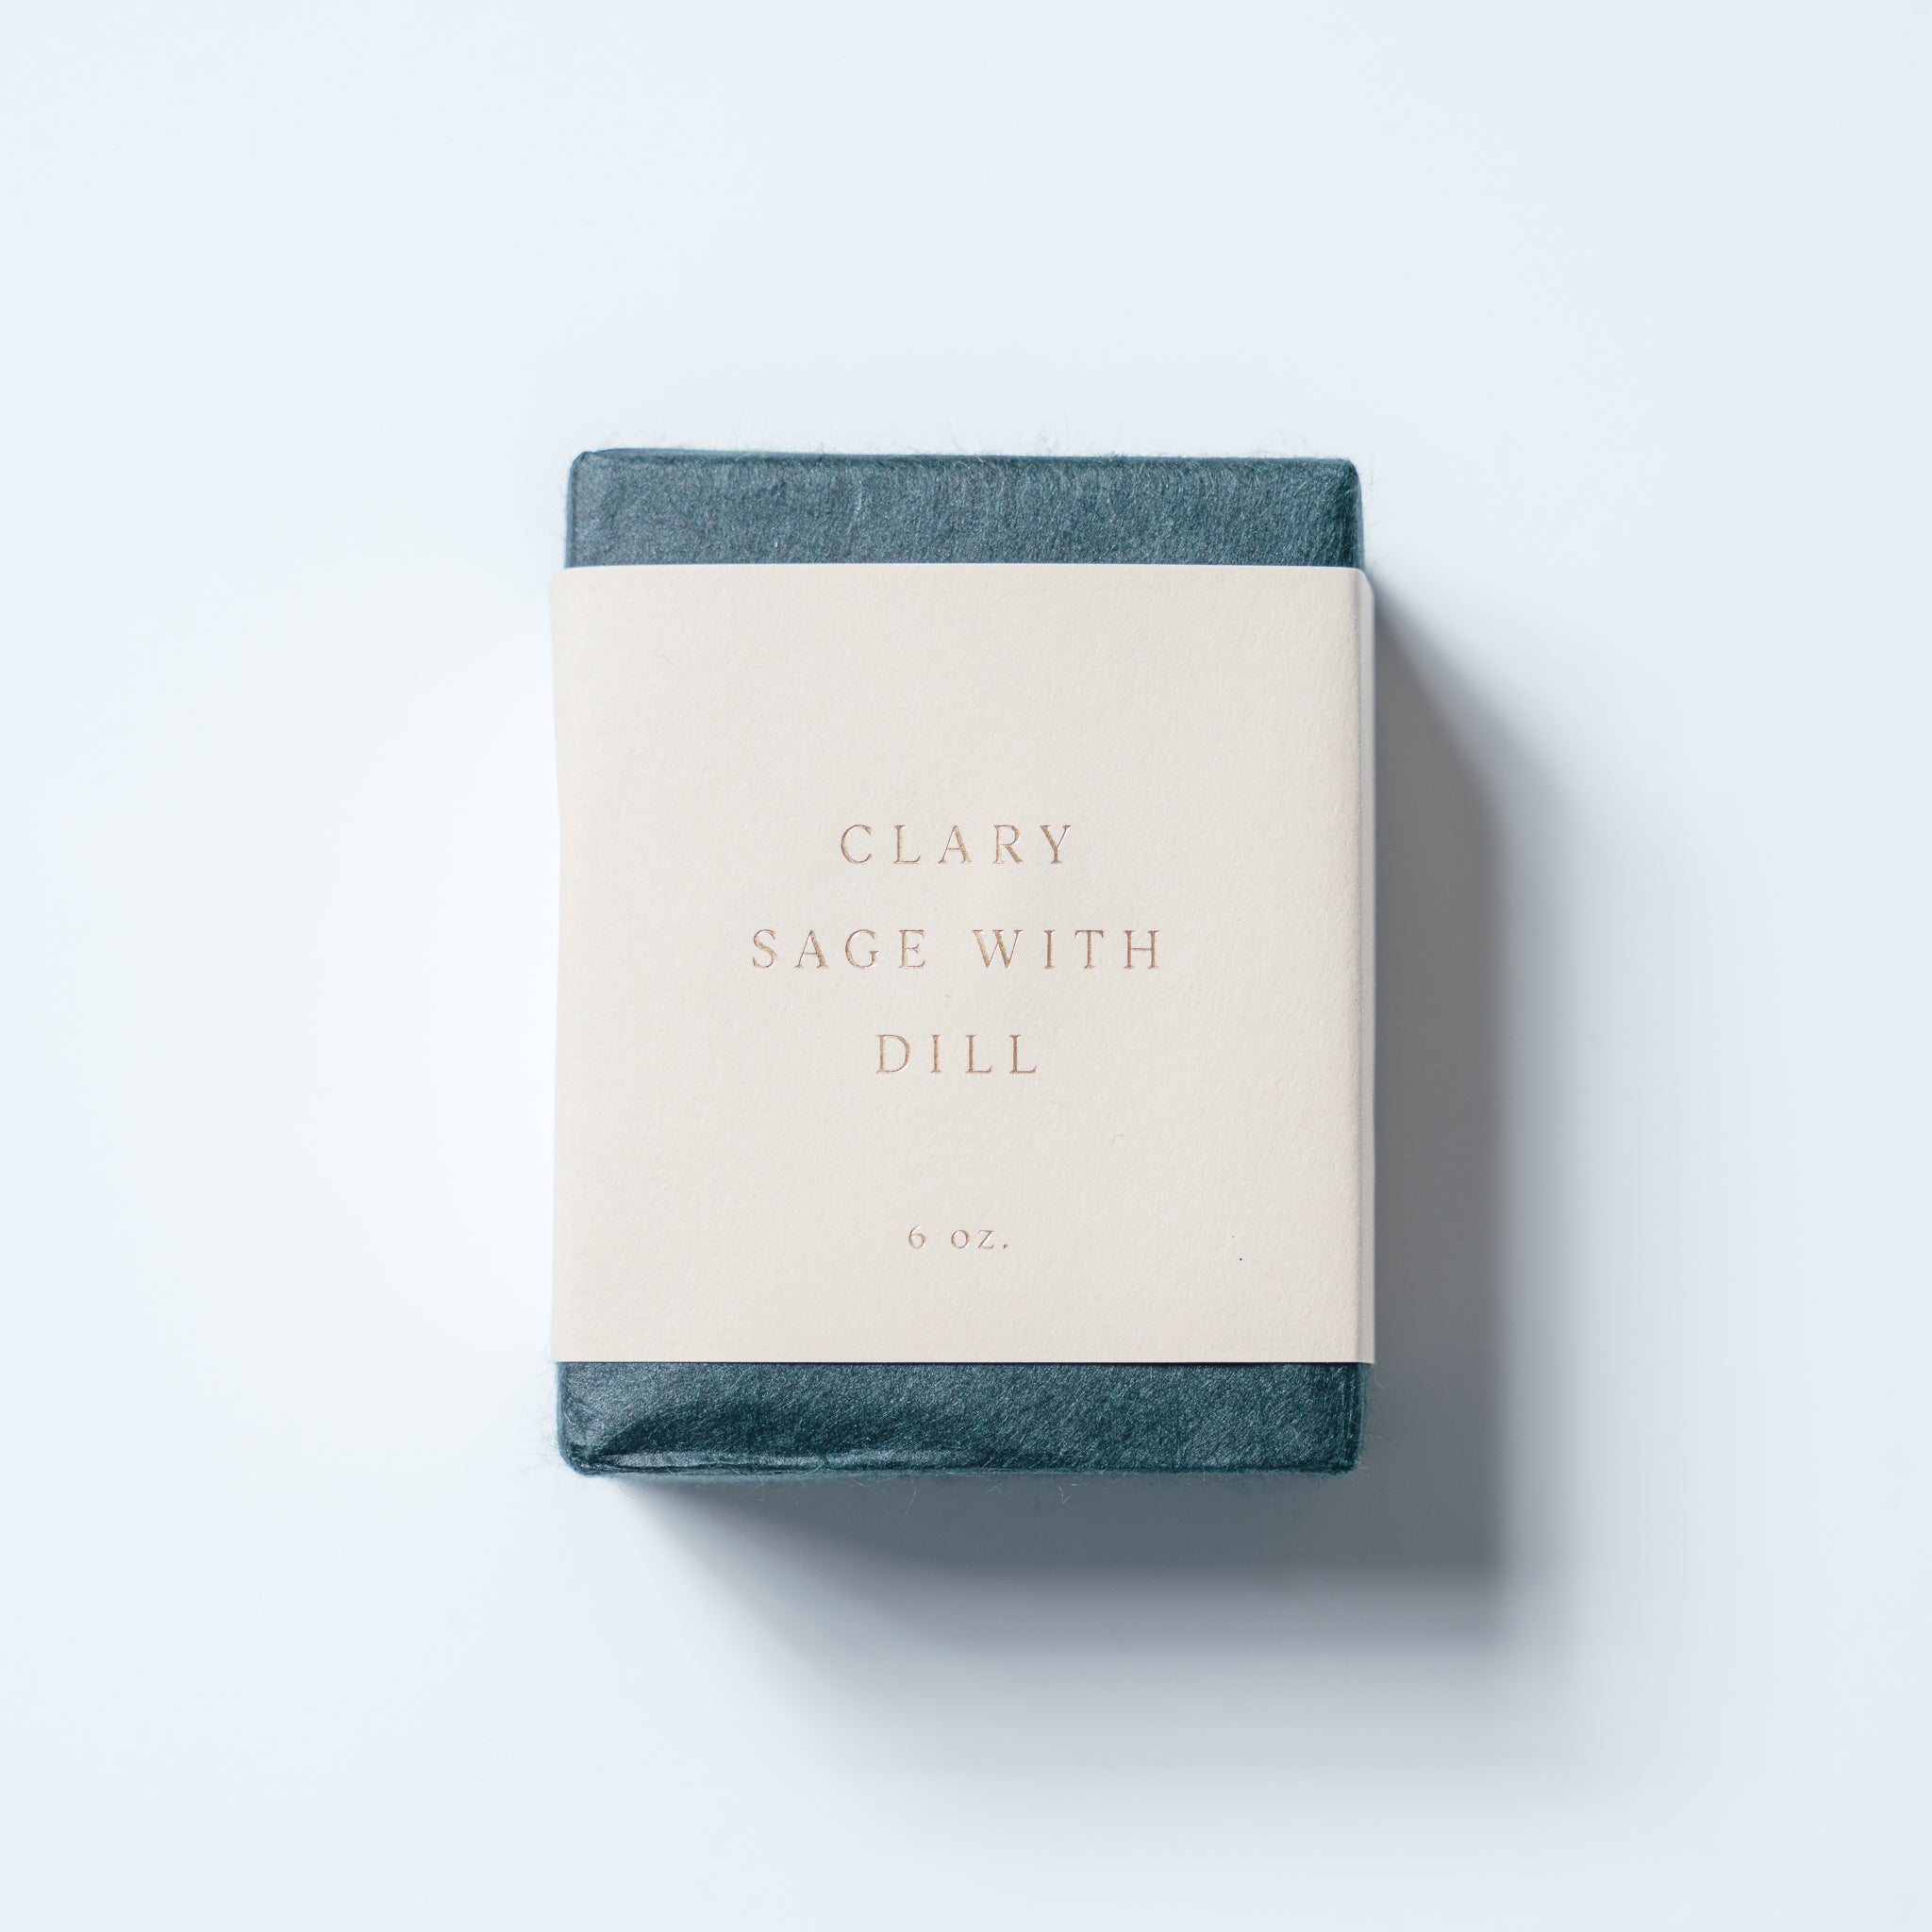 Saipua Soap Clary Sage with Dill 